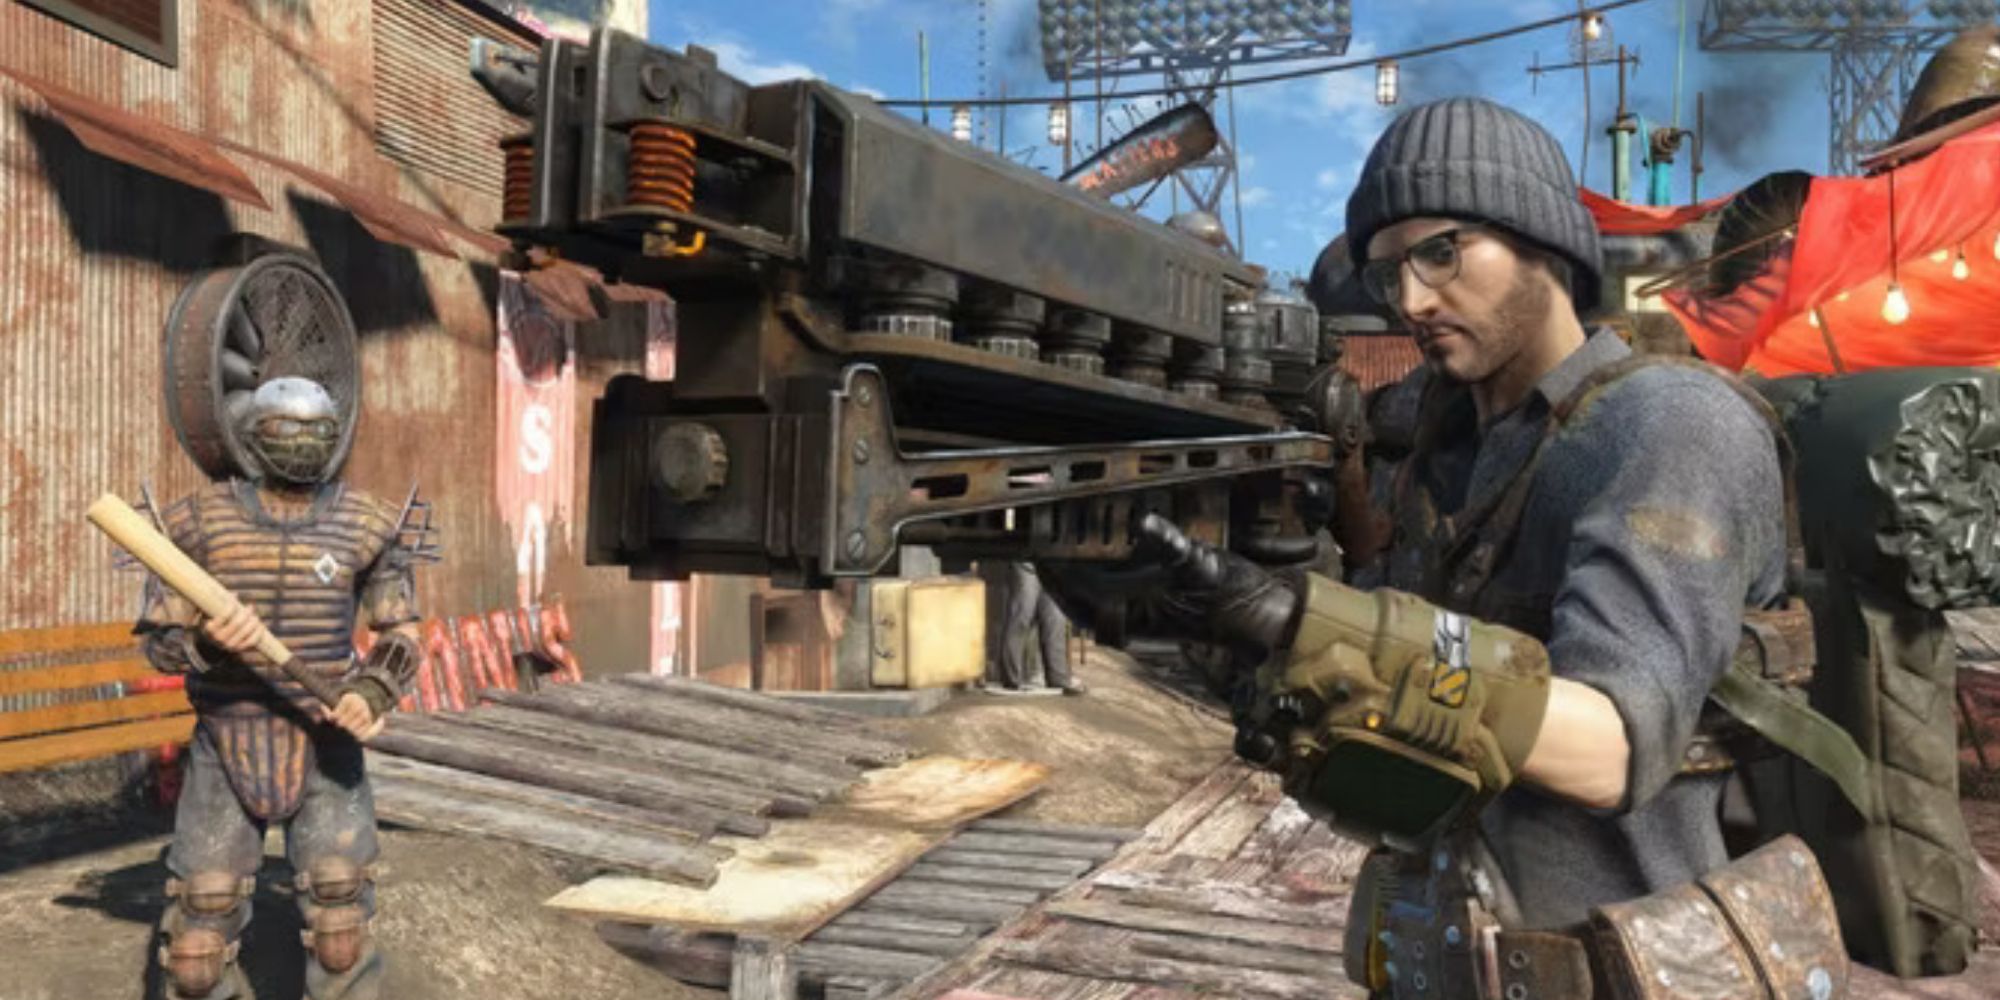 Fallout 4 Character holding a bulky, intimidating Gauss Rifle.